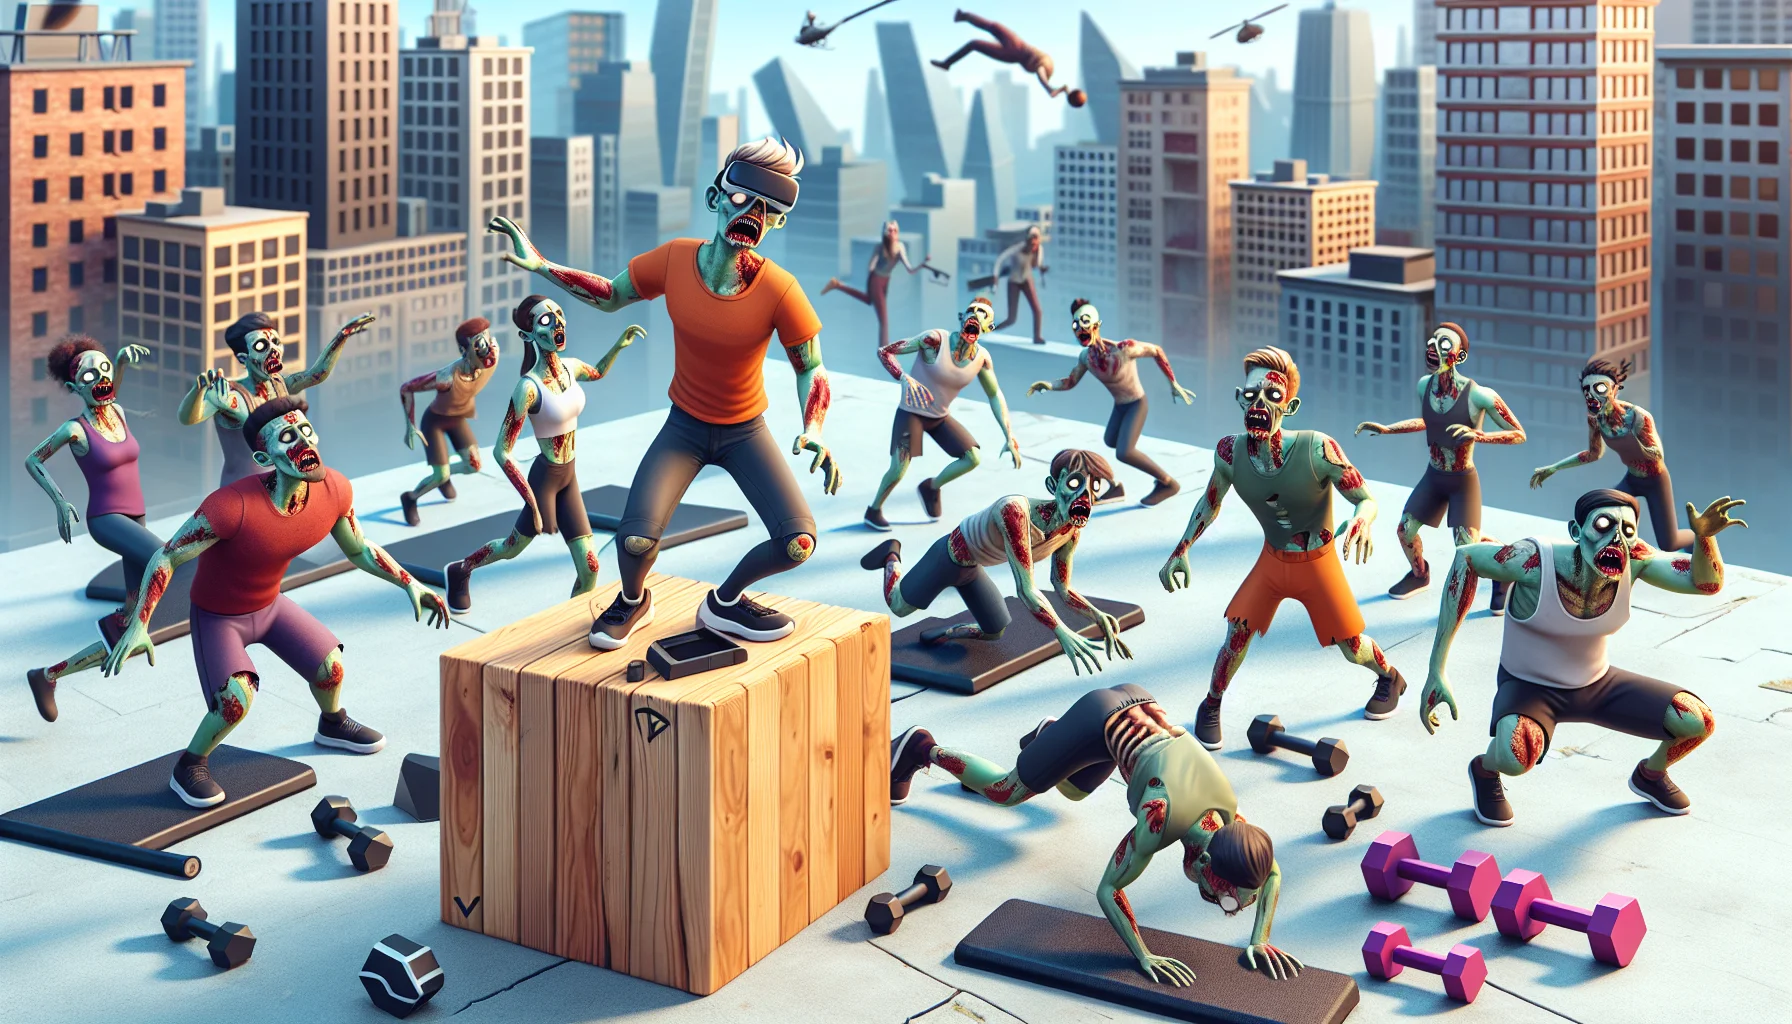 Craft a lively and funny scene that features a virtual reality game concept, where players, who are represented as animated zombies of various descents, are participating in thrilling parkour activities. Highlight their athletic abilities, with agile movements and stunts across urban environments full of challenges. This absurd and humorous setting is meant to encourage physical exercise, so incorporate elements related to health and fitness, such as jogger zombies or zombies doing push-ups. Make sure the atmosphere is light-hearted and enticing rather than scary.